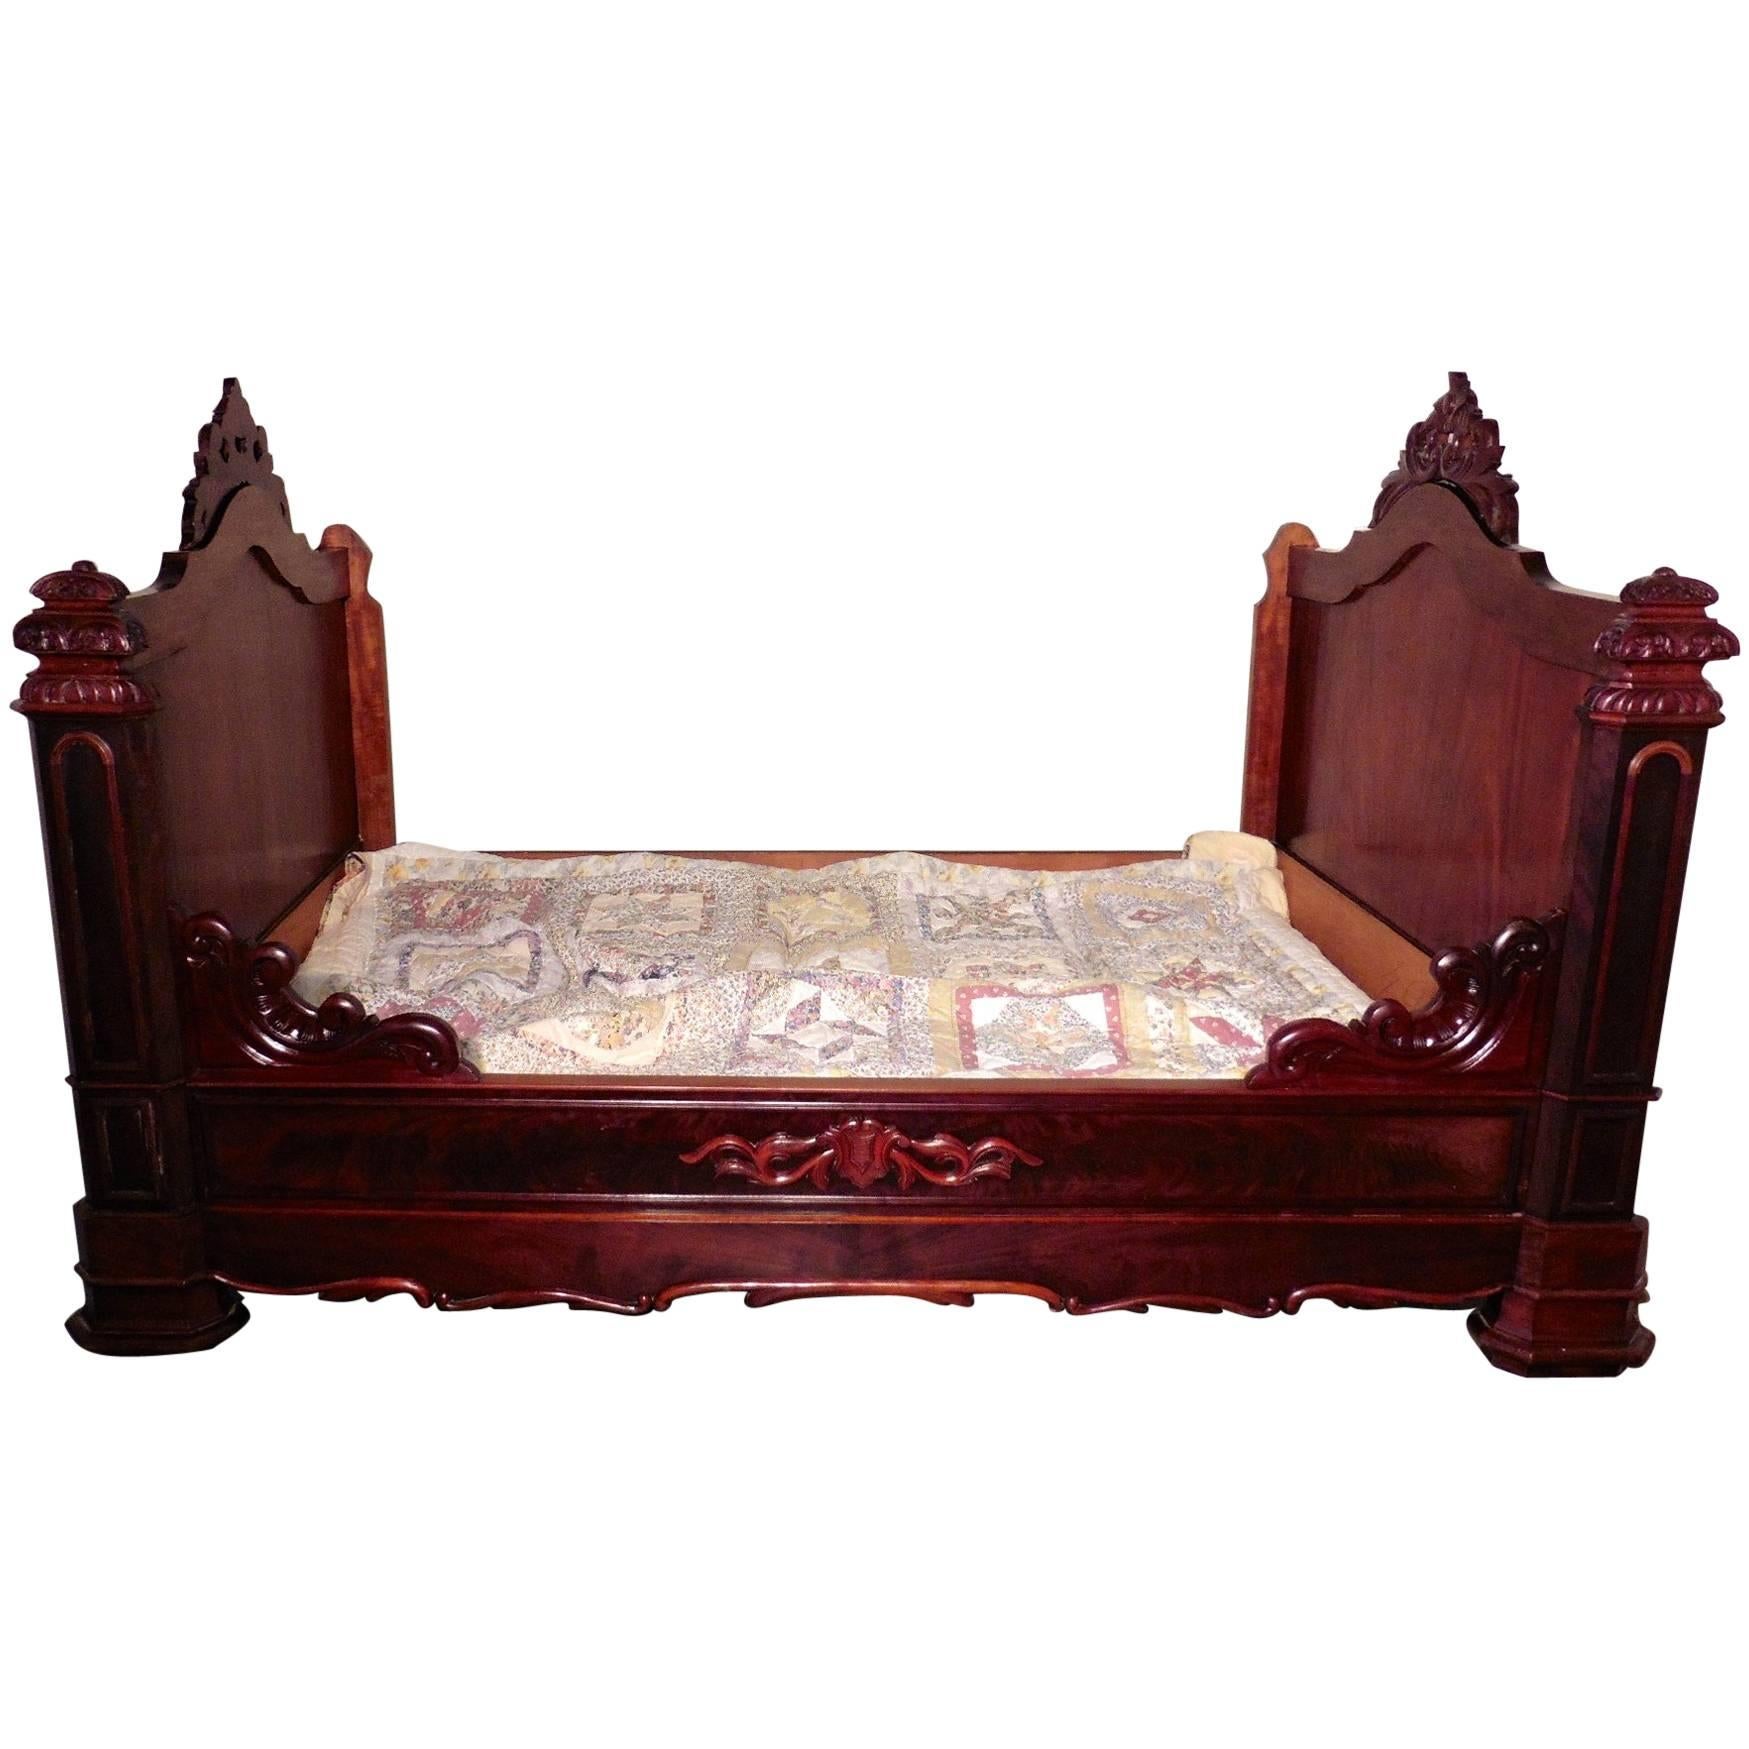 French Flame Mahogany and Walnut Sleigh Bed or Empire Style Daybed